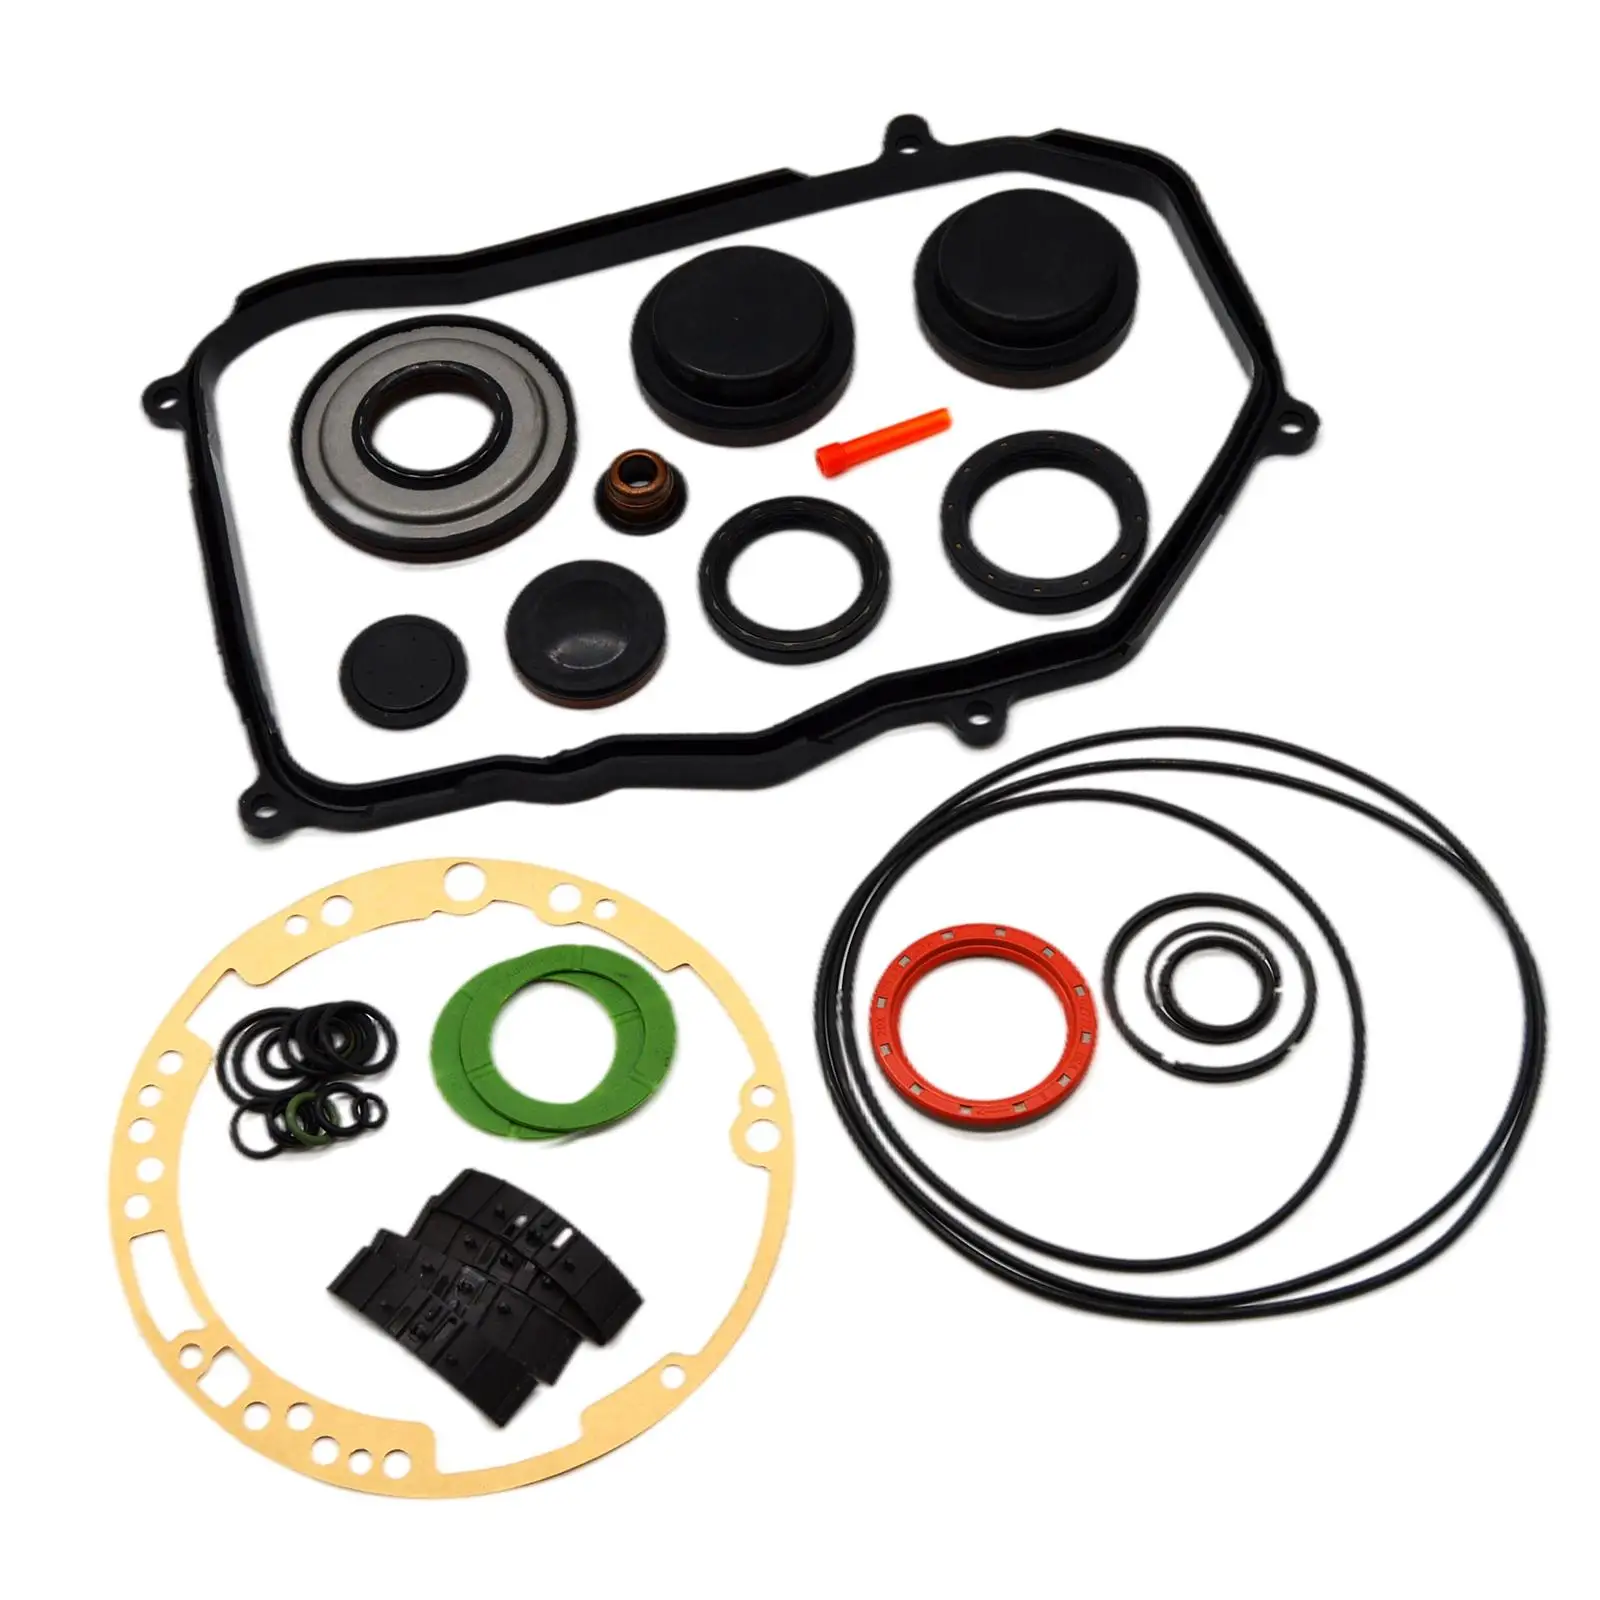 

Transmission Gasket and Seal Rebuild Set Fit for VW Passat B5 1.8 2.0 Santana 2000 Spare Parts Easy to Install Replace Parts